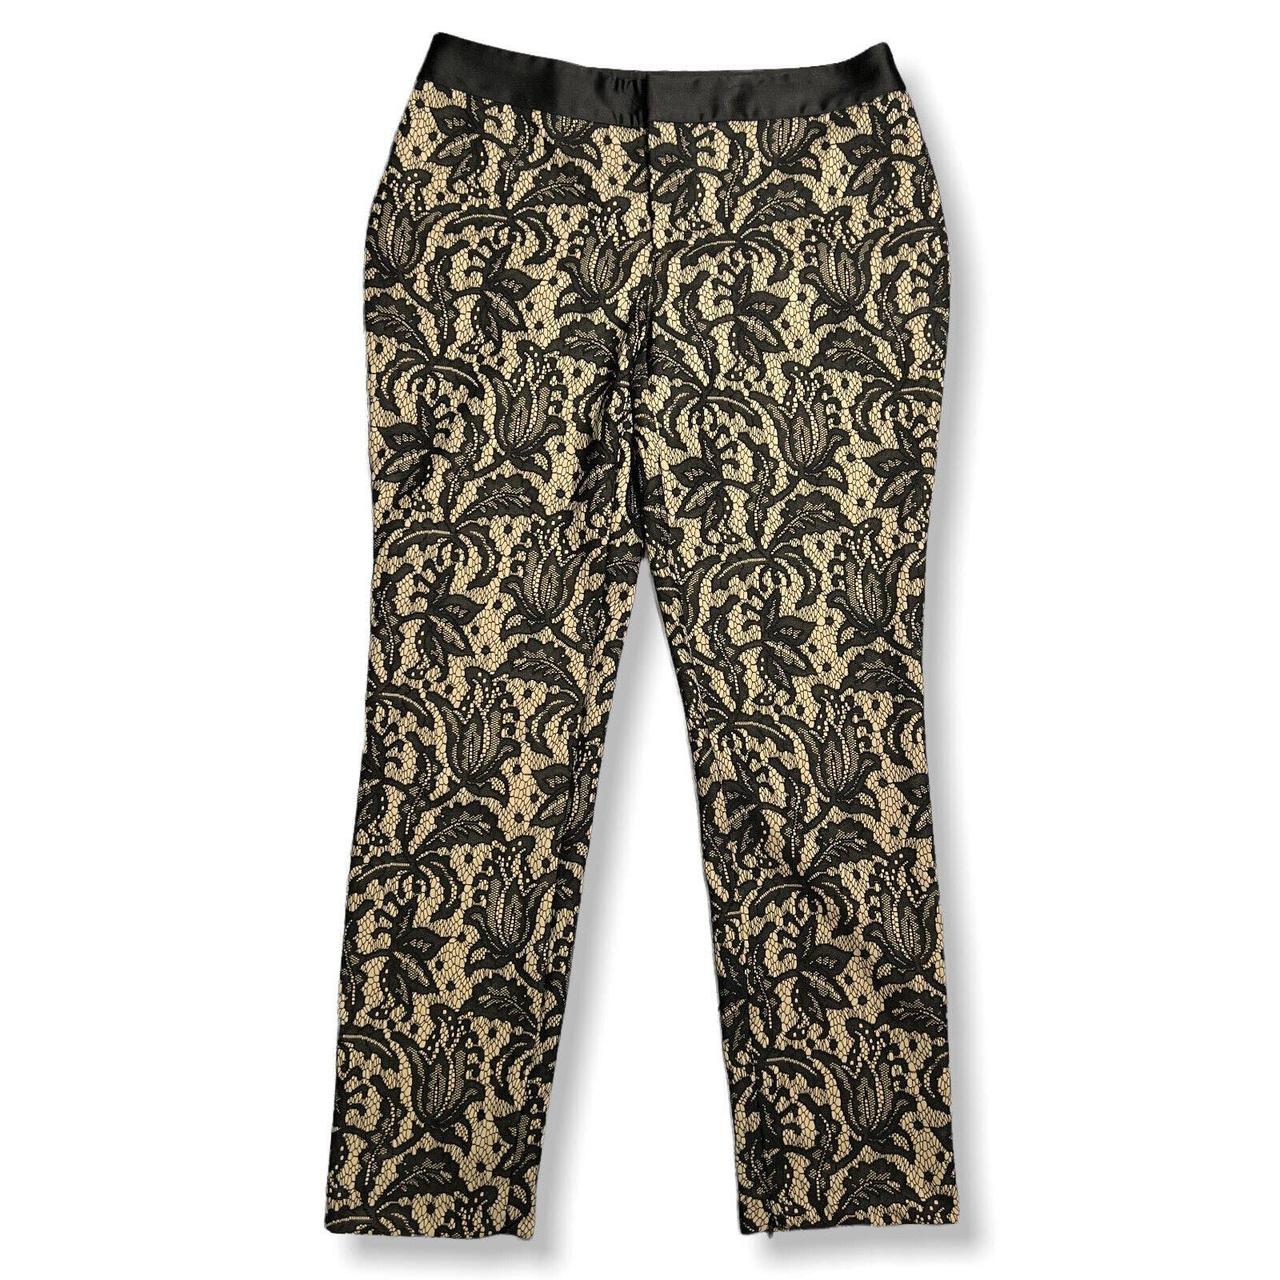 Chico's Slim Cropped Pants for Women